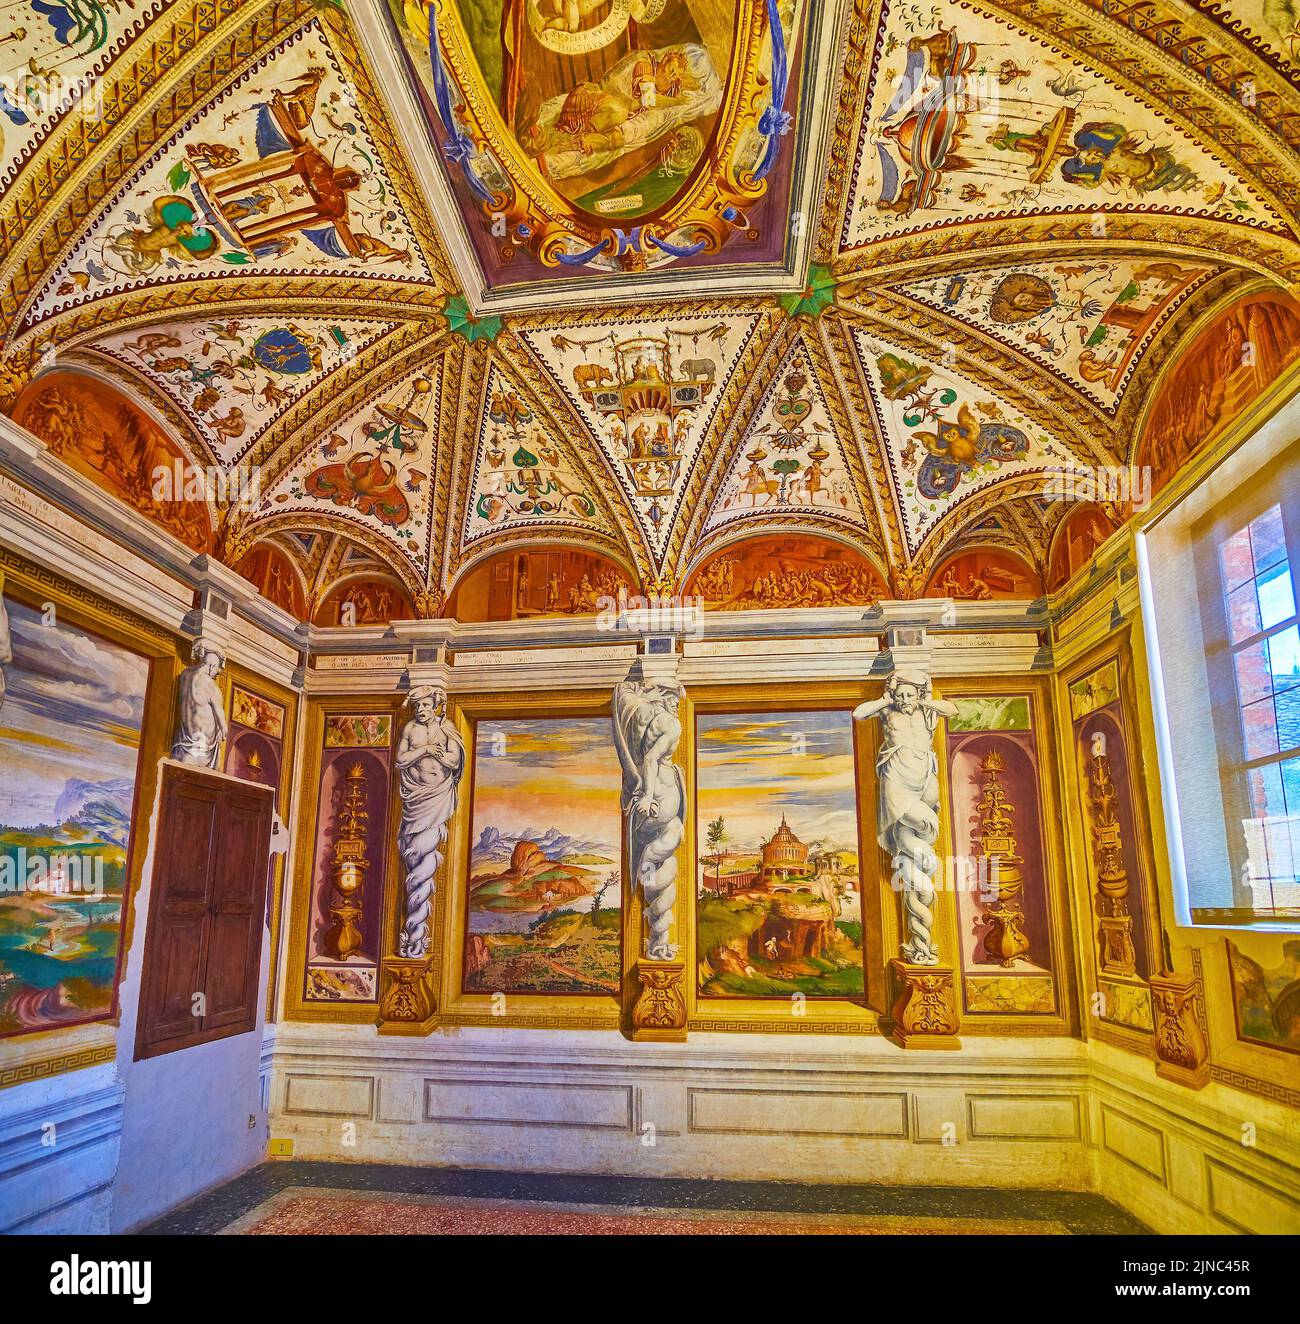 CERTOSA DI PAVIA, ITALY - APRIL 9, 2022: Studiolo room of former Ducale Palace, nowadays Certosa Museum, on April 9 in Certosa di Pavia, Italy Stock Photo